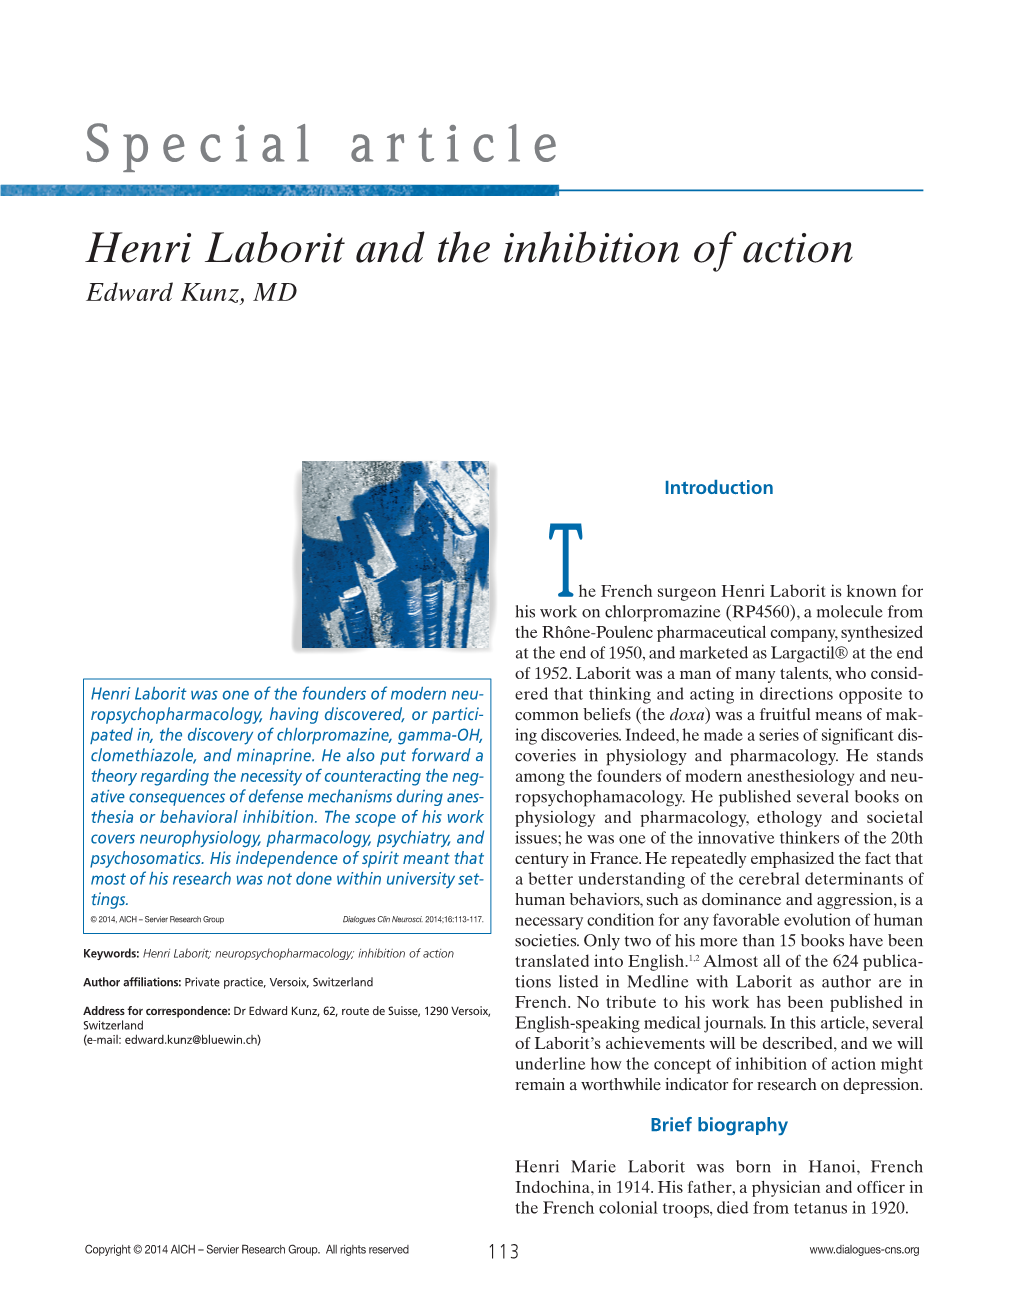 Henri Laborit and the Inhibition of Action Edward Kunz, MD